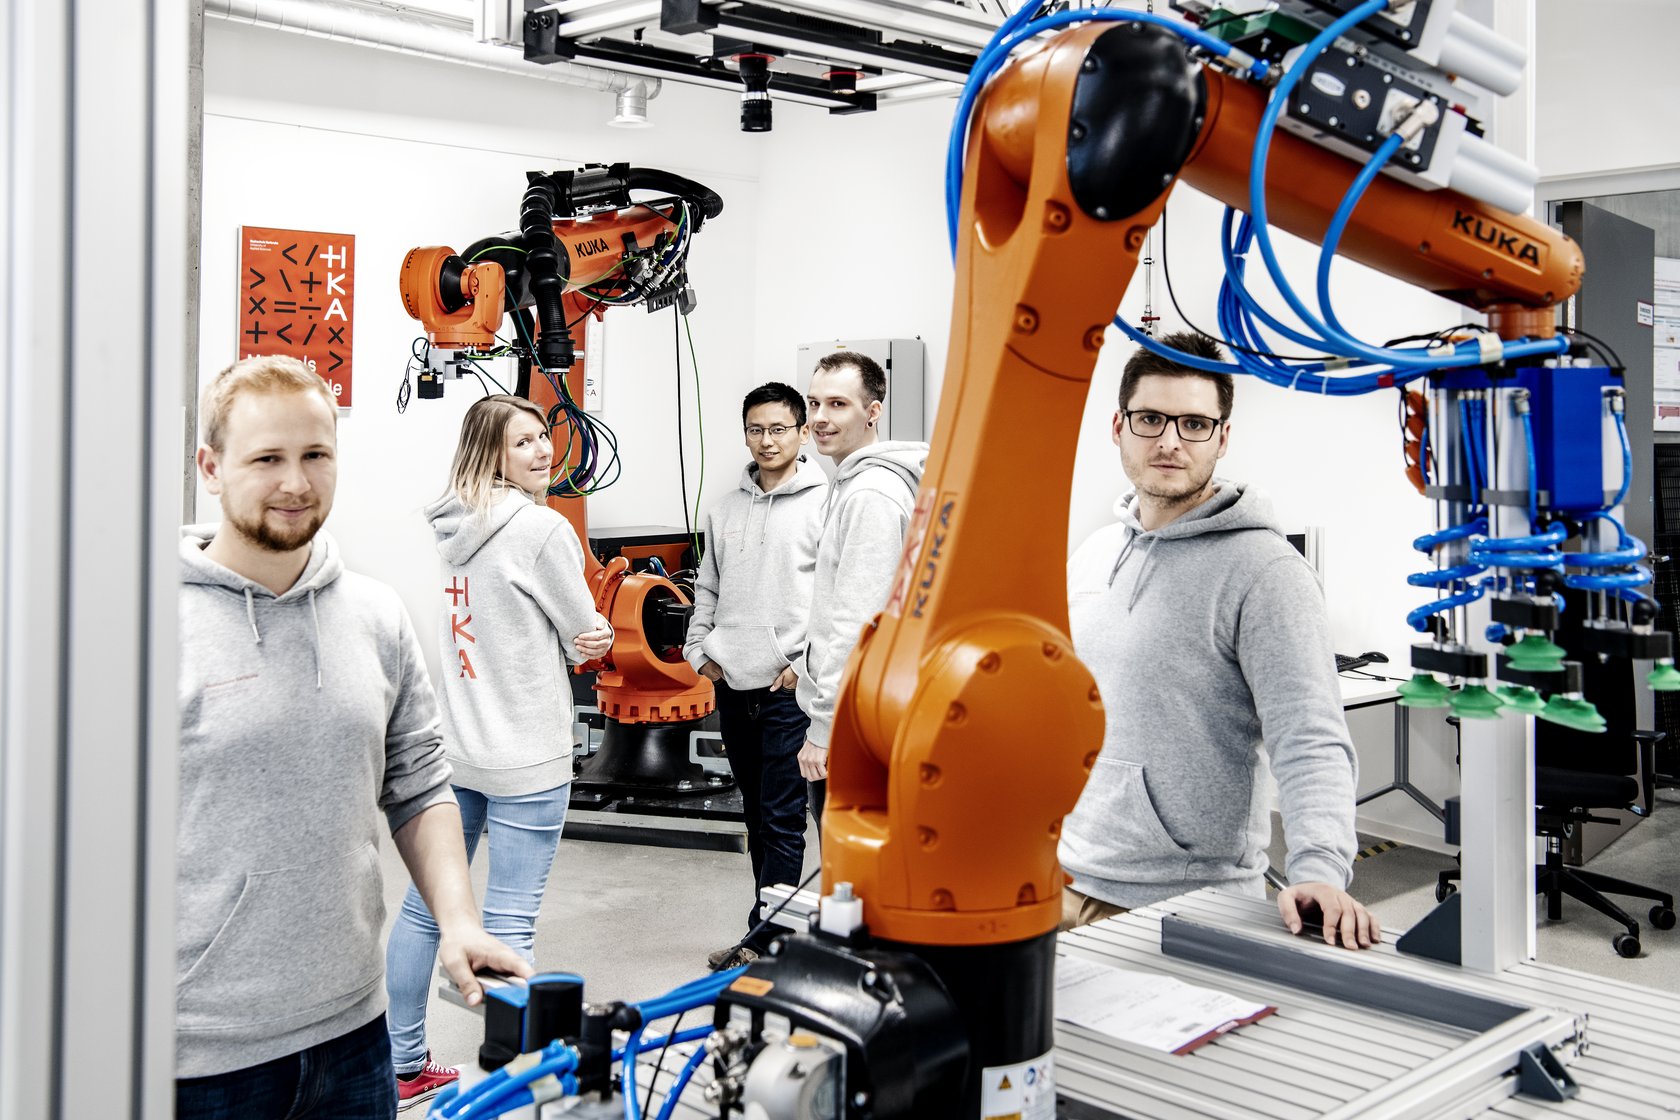 IAF facilities Industrial Robot Laboratory, the iRAS staff around an industrial robot